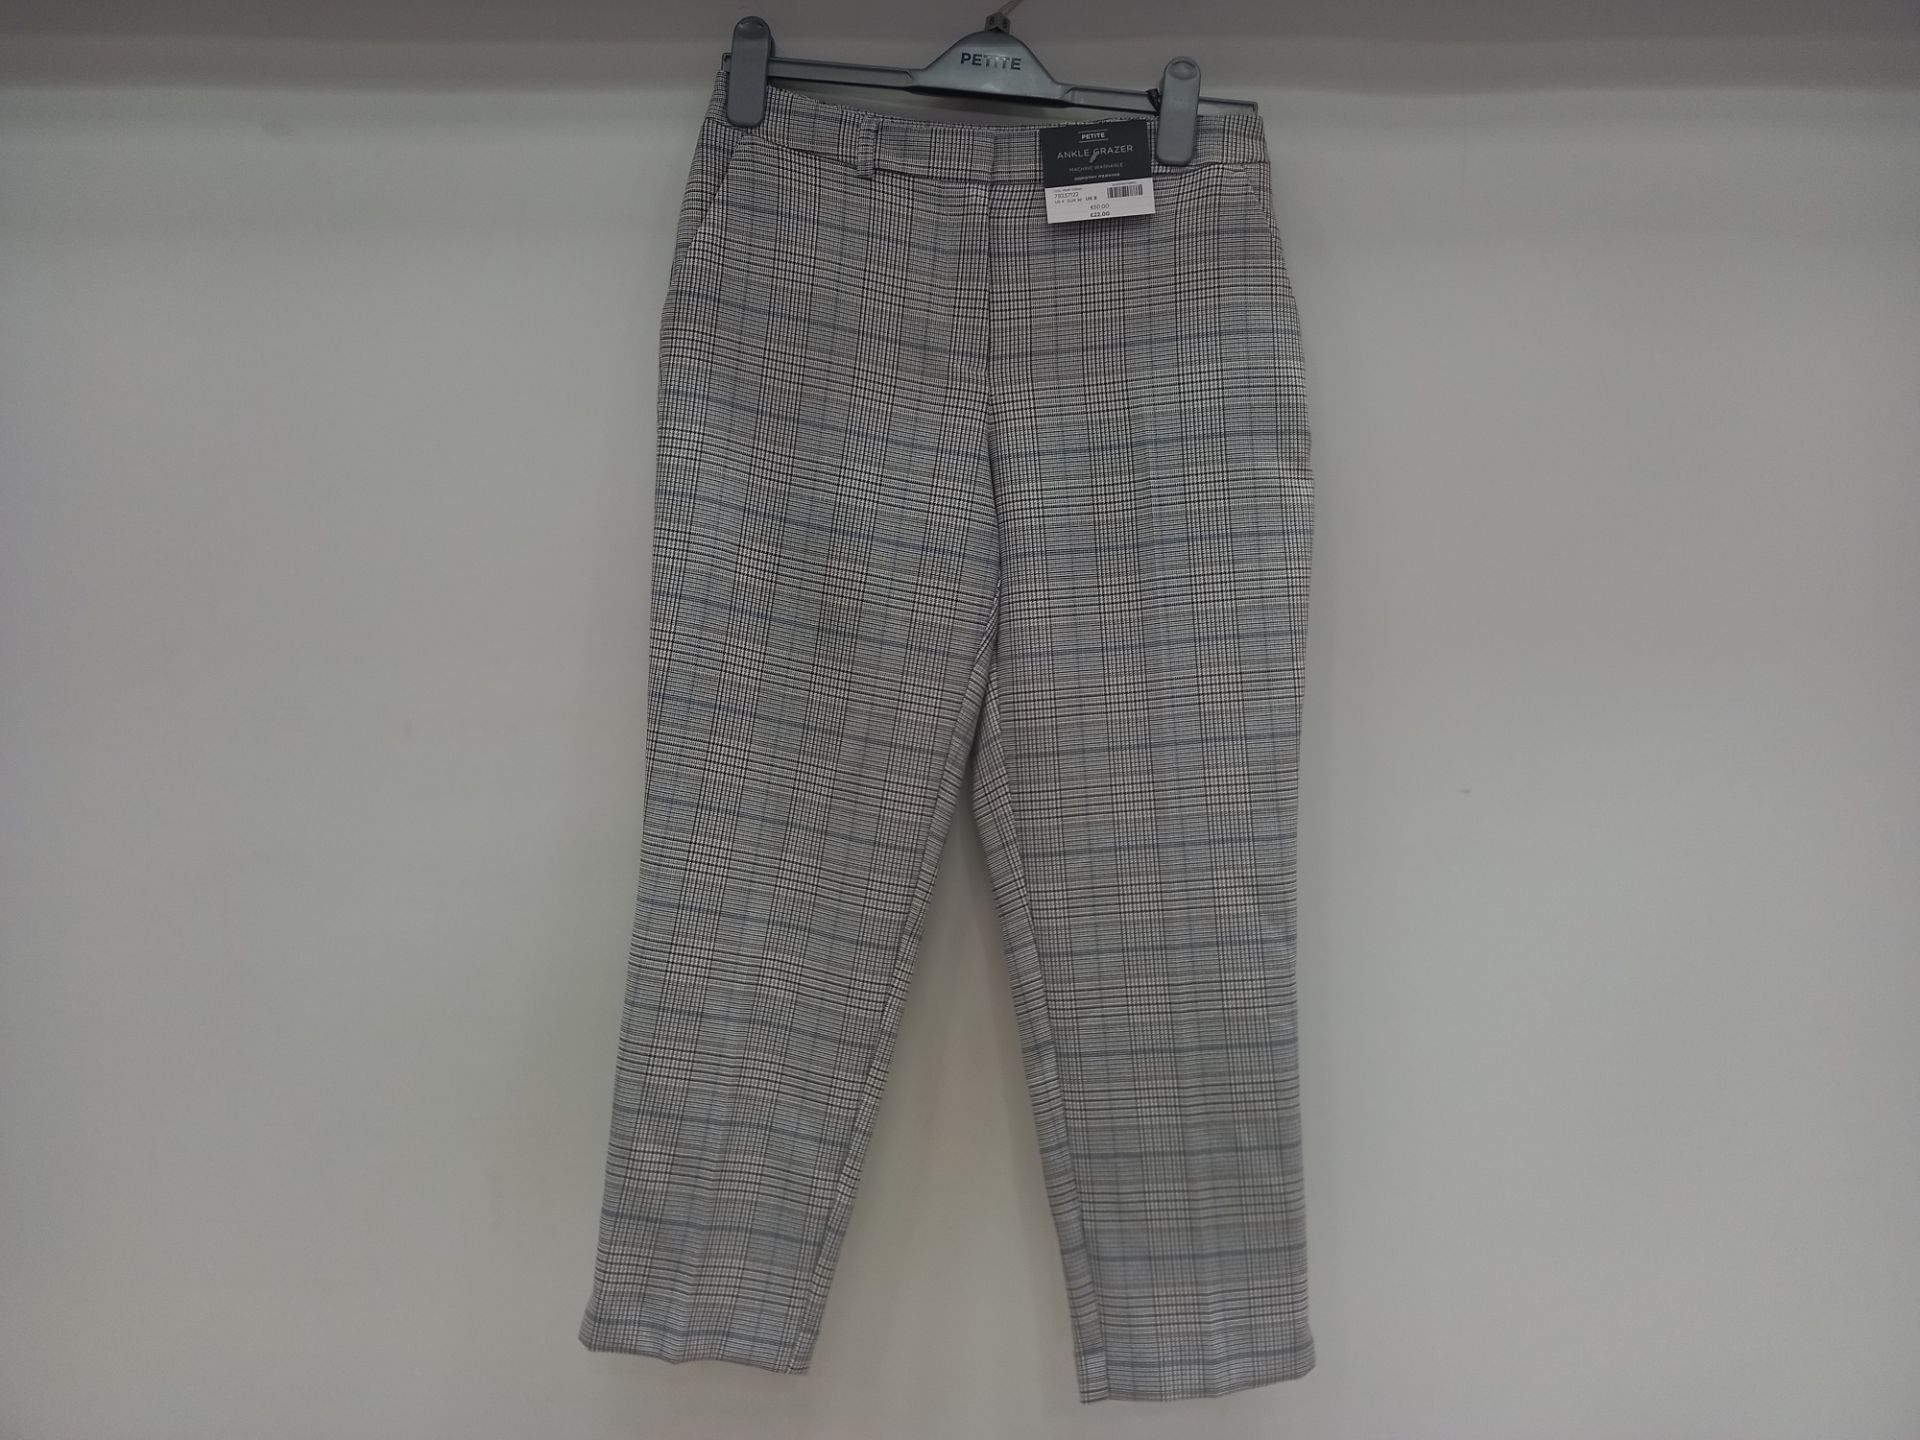 12 X BRAND NEW DOROTHY PERKINS PETITE CHEQUERED ANKLE GRAZERS UK SIZE 8, 10 AND 16 RRP £22.00 (TOTAL